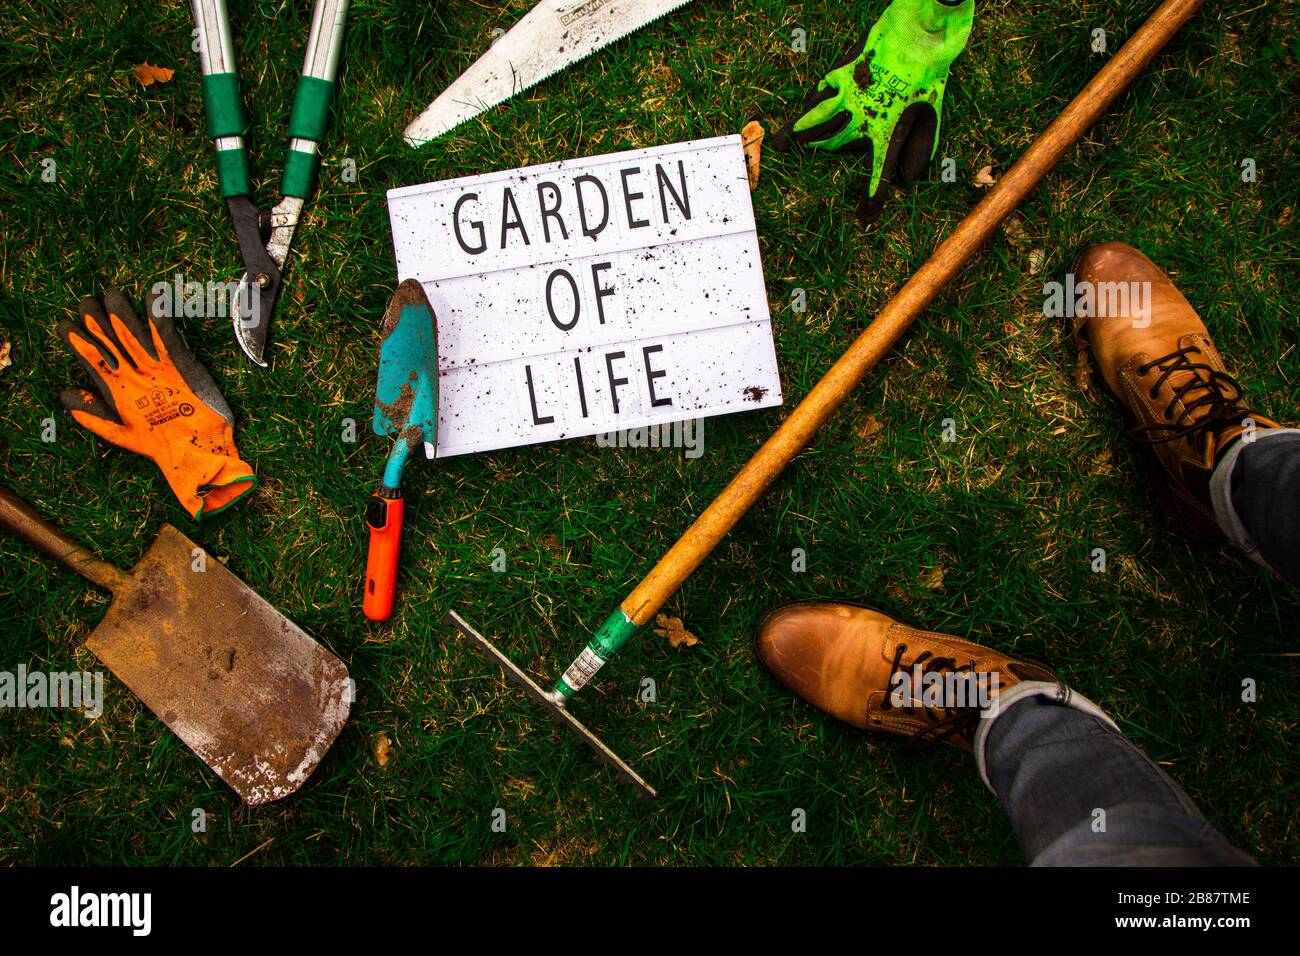 Top down view of a lightbox surrounded by tools of a gardener and the garderner himself. The lightbox has 'Garden Of Life' spelled out. Lifestyle. Stock Photo